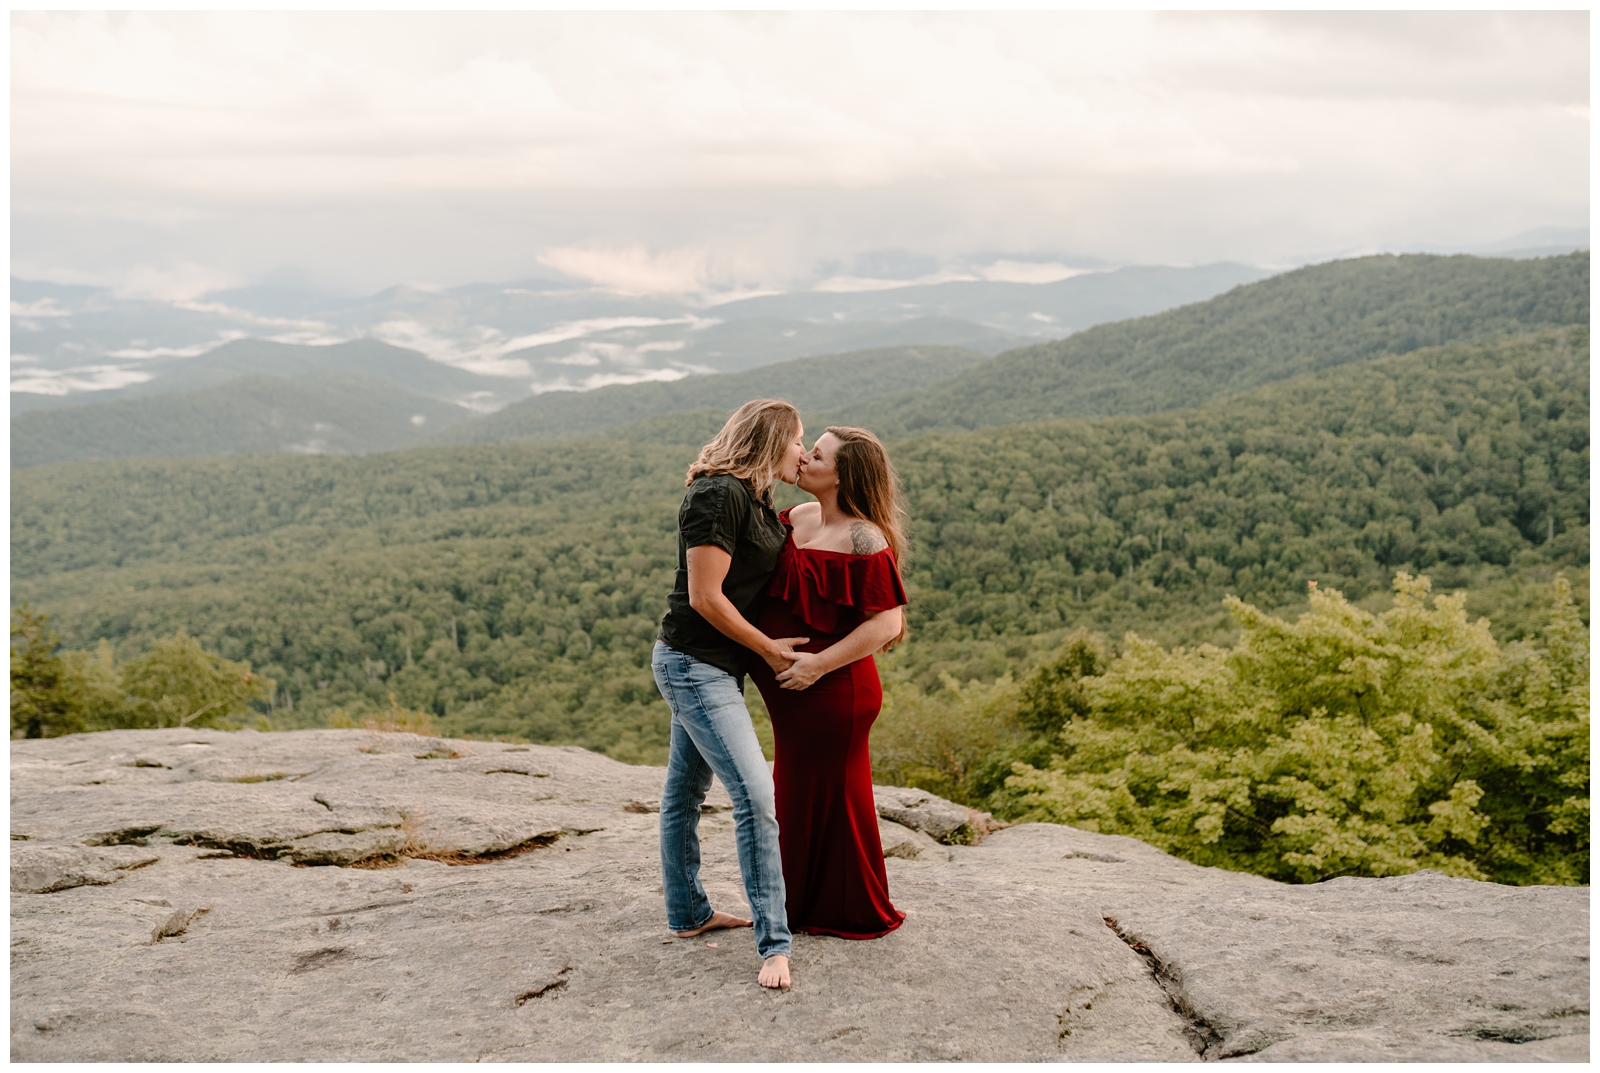 Boone Maternity Session in the Mountains by adventurous photographer Kayli LaFon Photography